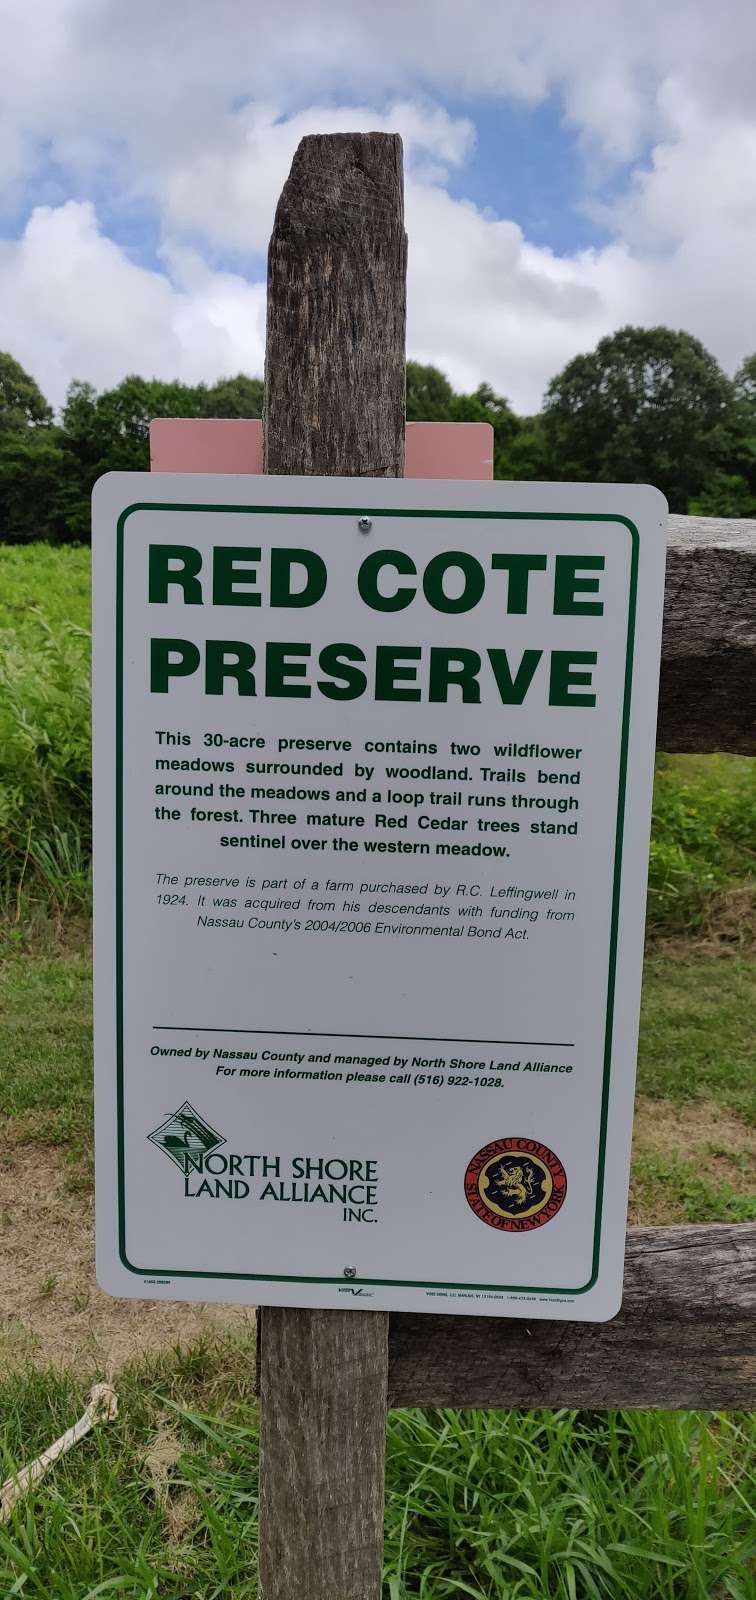 Red Cote Preserve | 27 L 02320, Oyster Bay, NY 11771 | Phone: (516) 922-1028